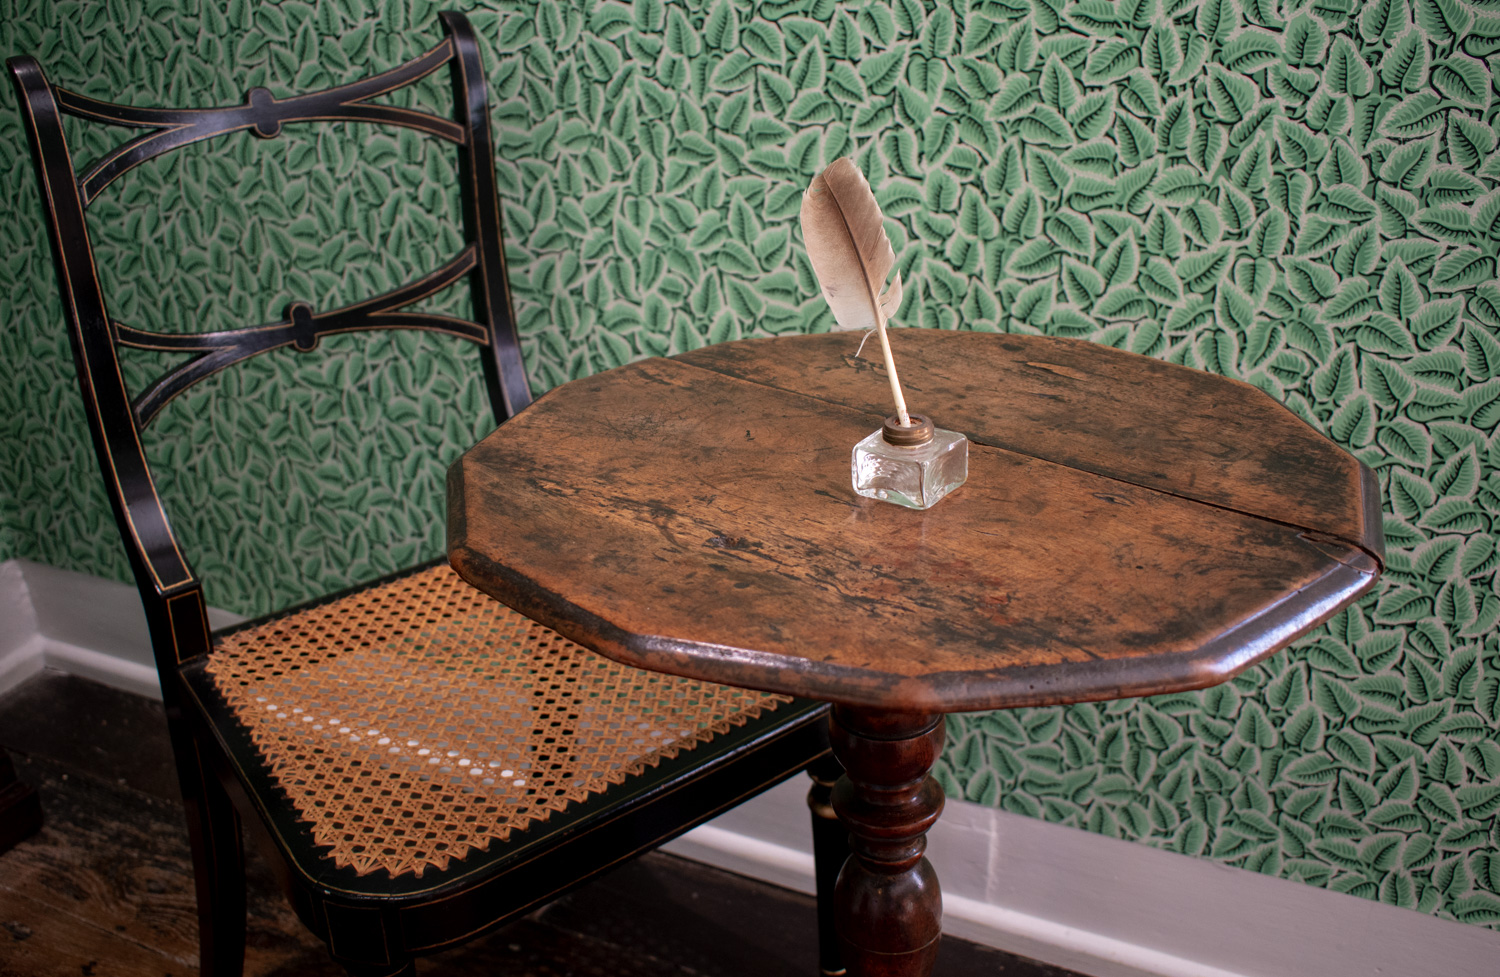 Jane Austen's writing table seen in the Dining Parlour at Jane Austen's House